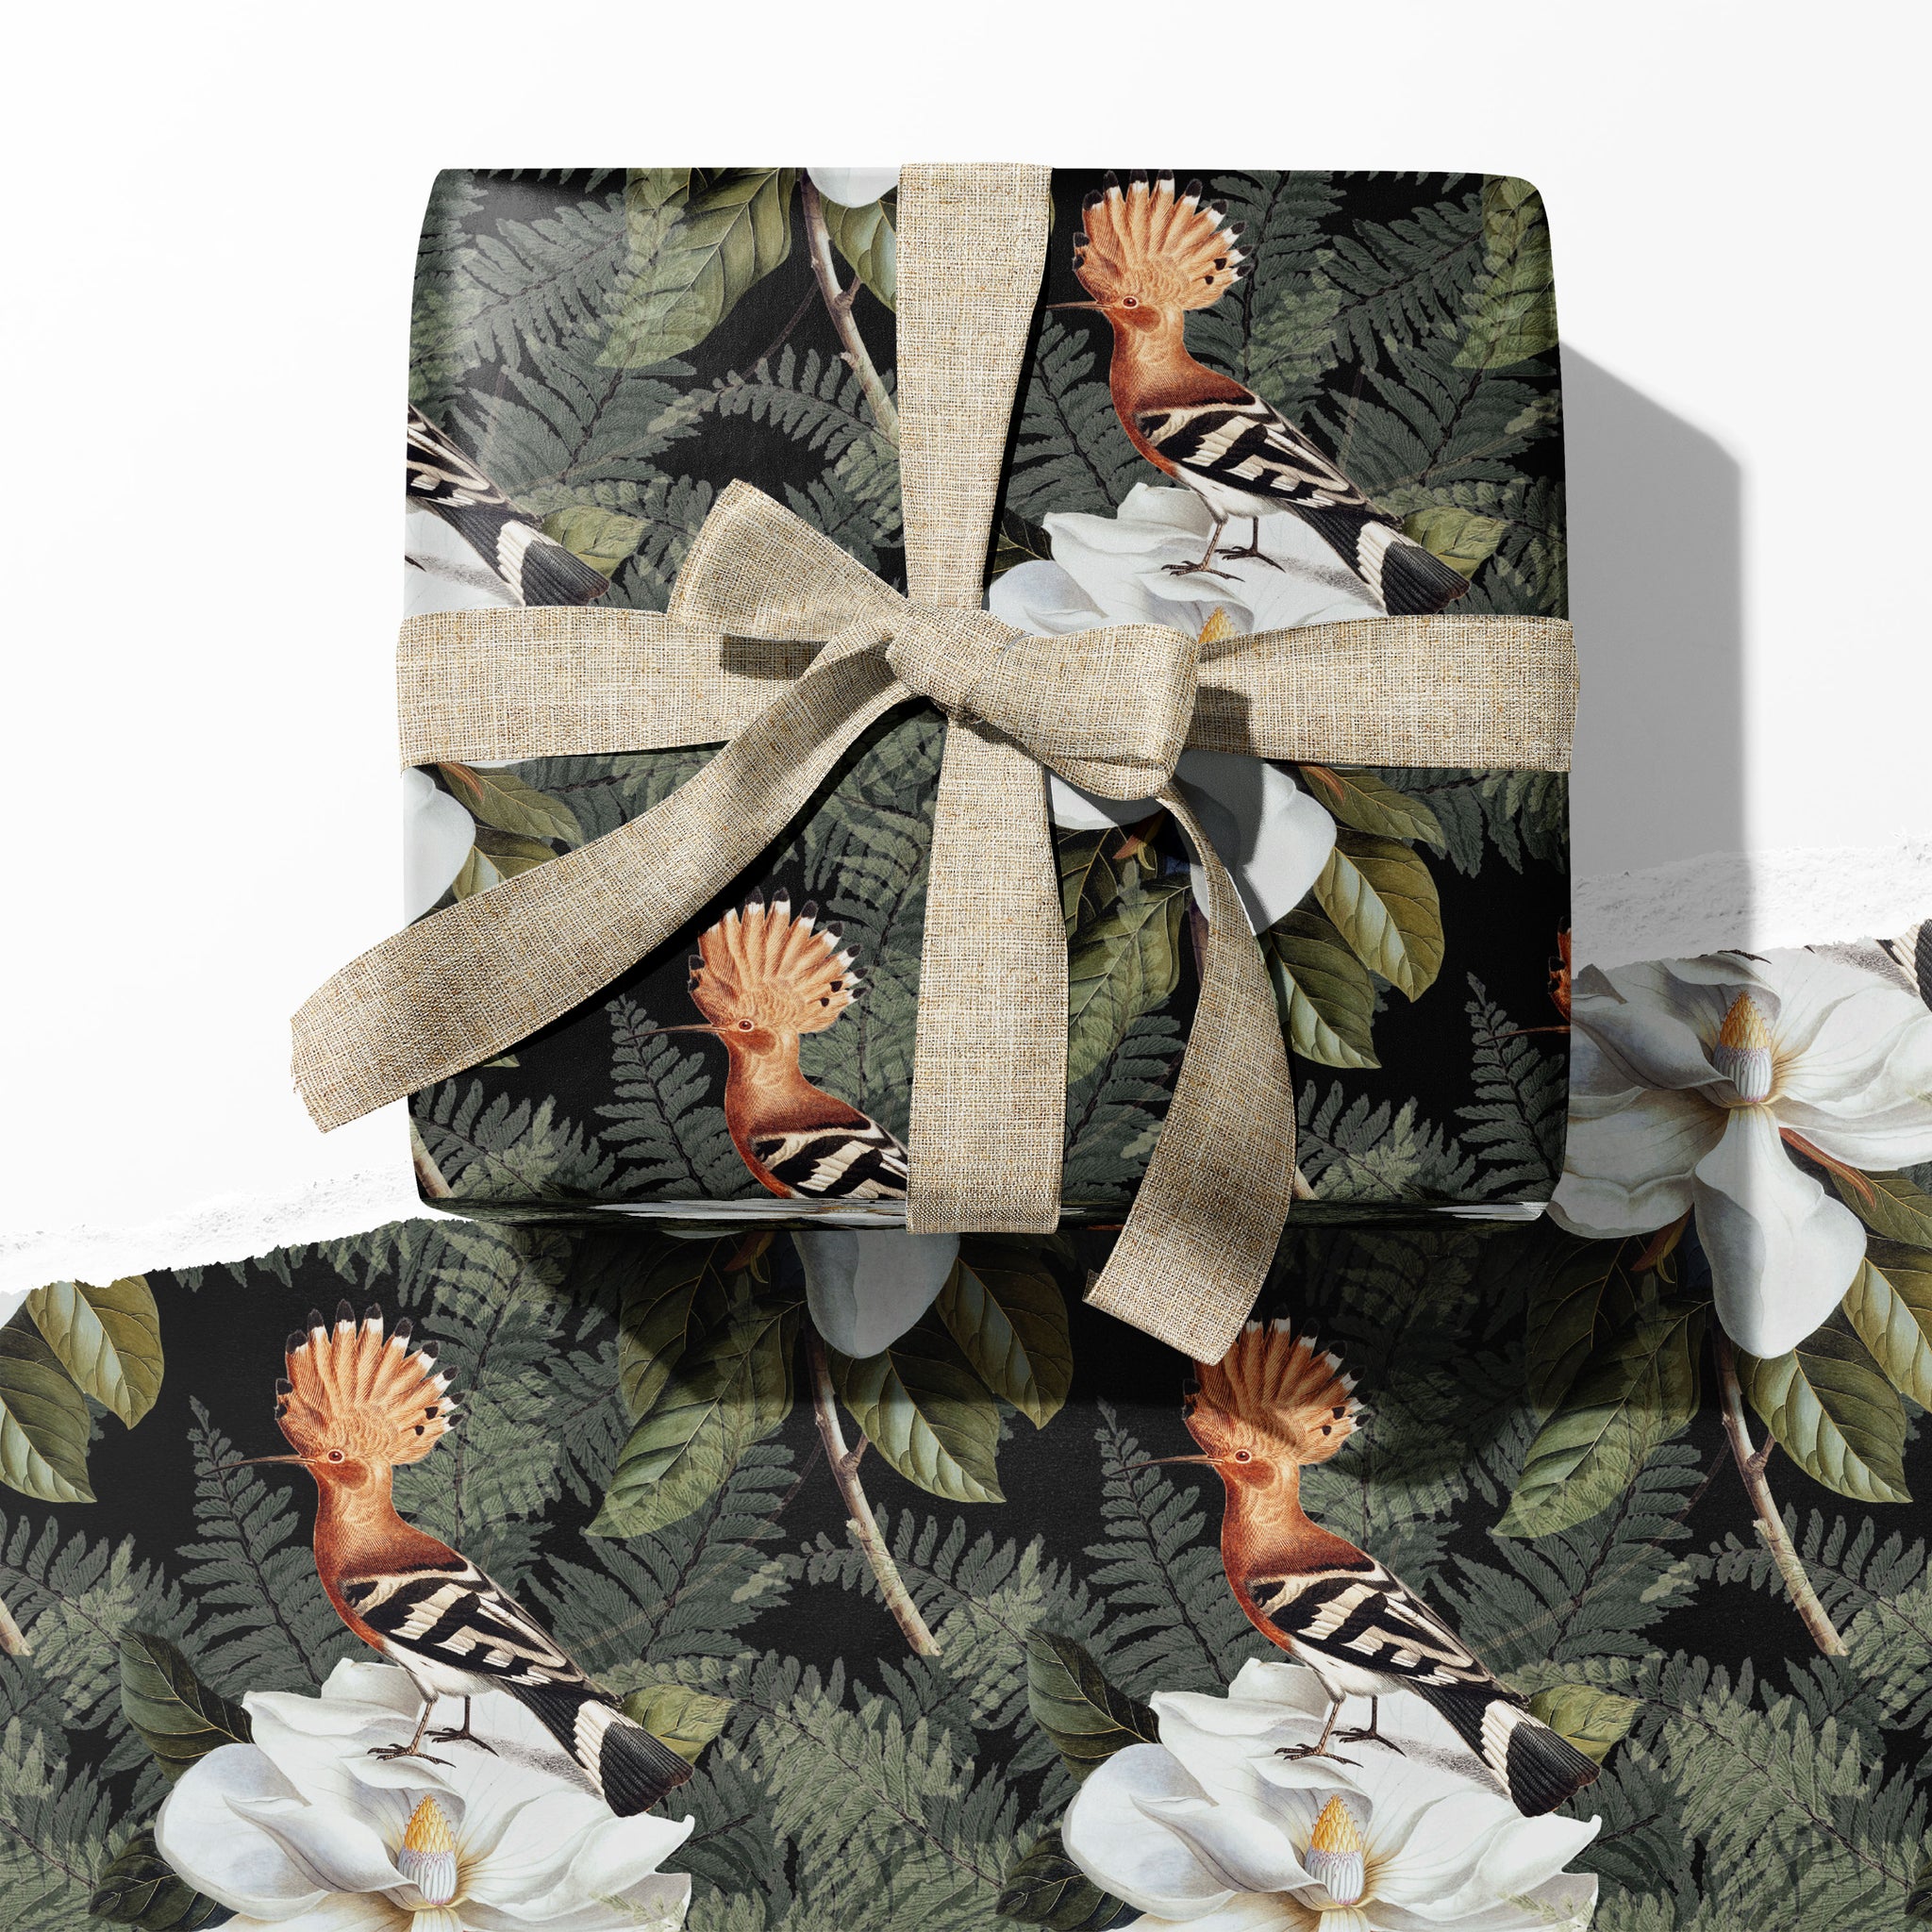 5 Rolls Black Flower Wrapping Paper